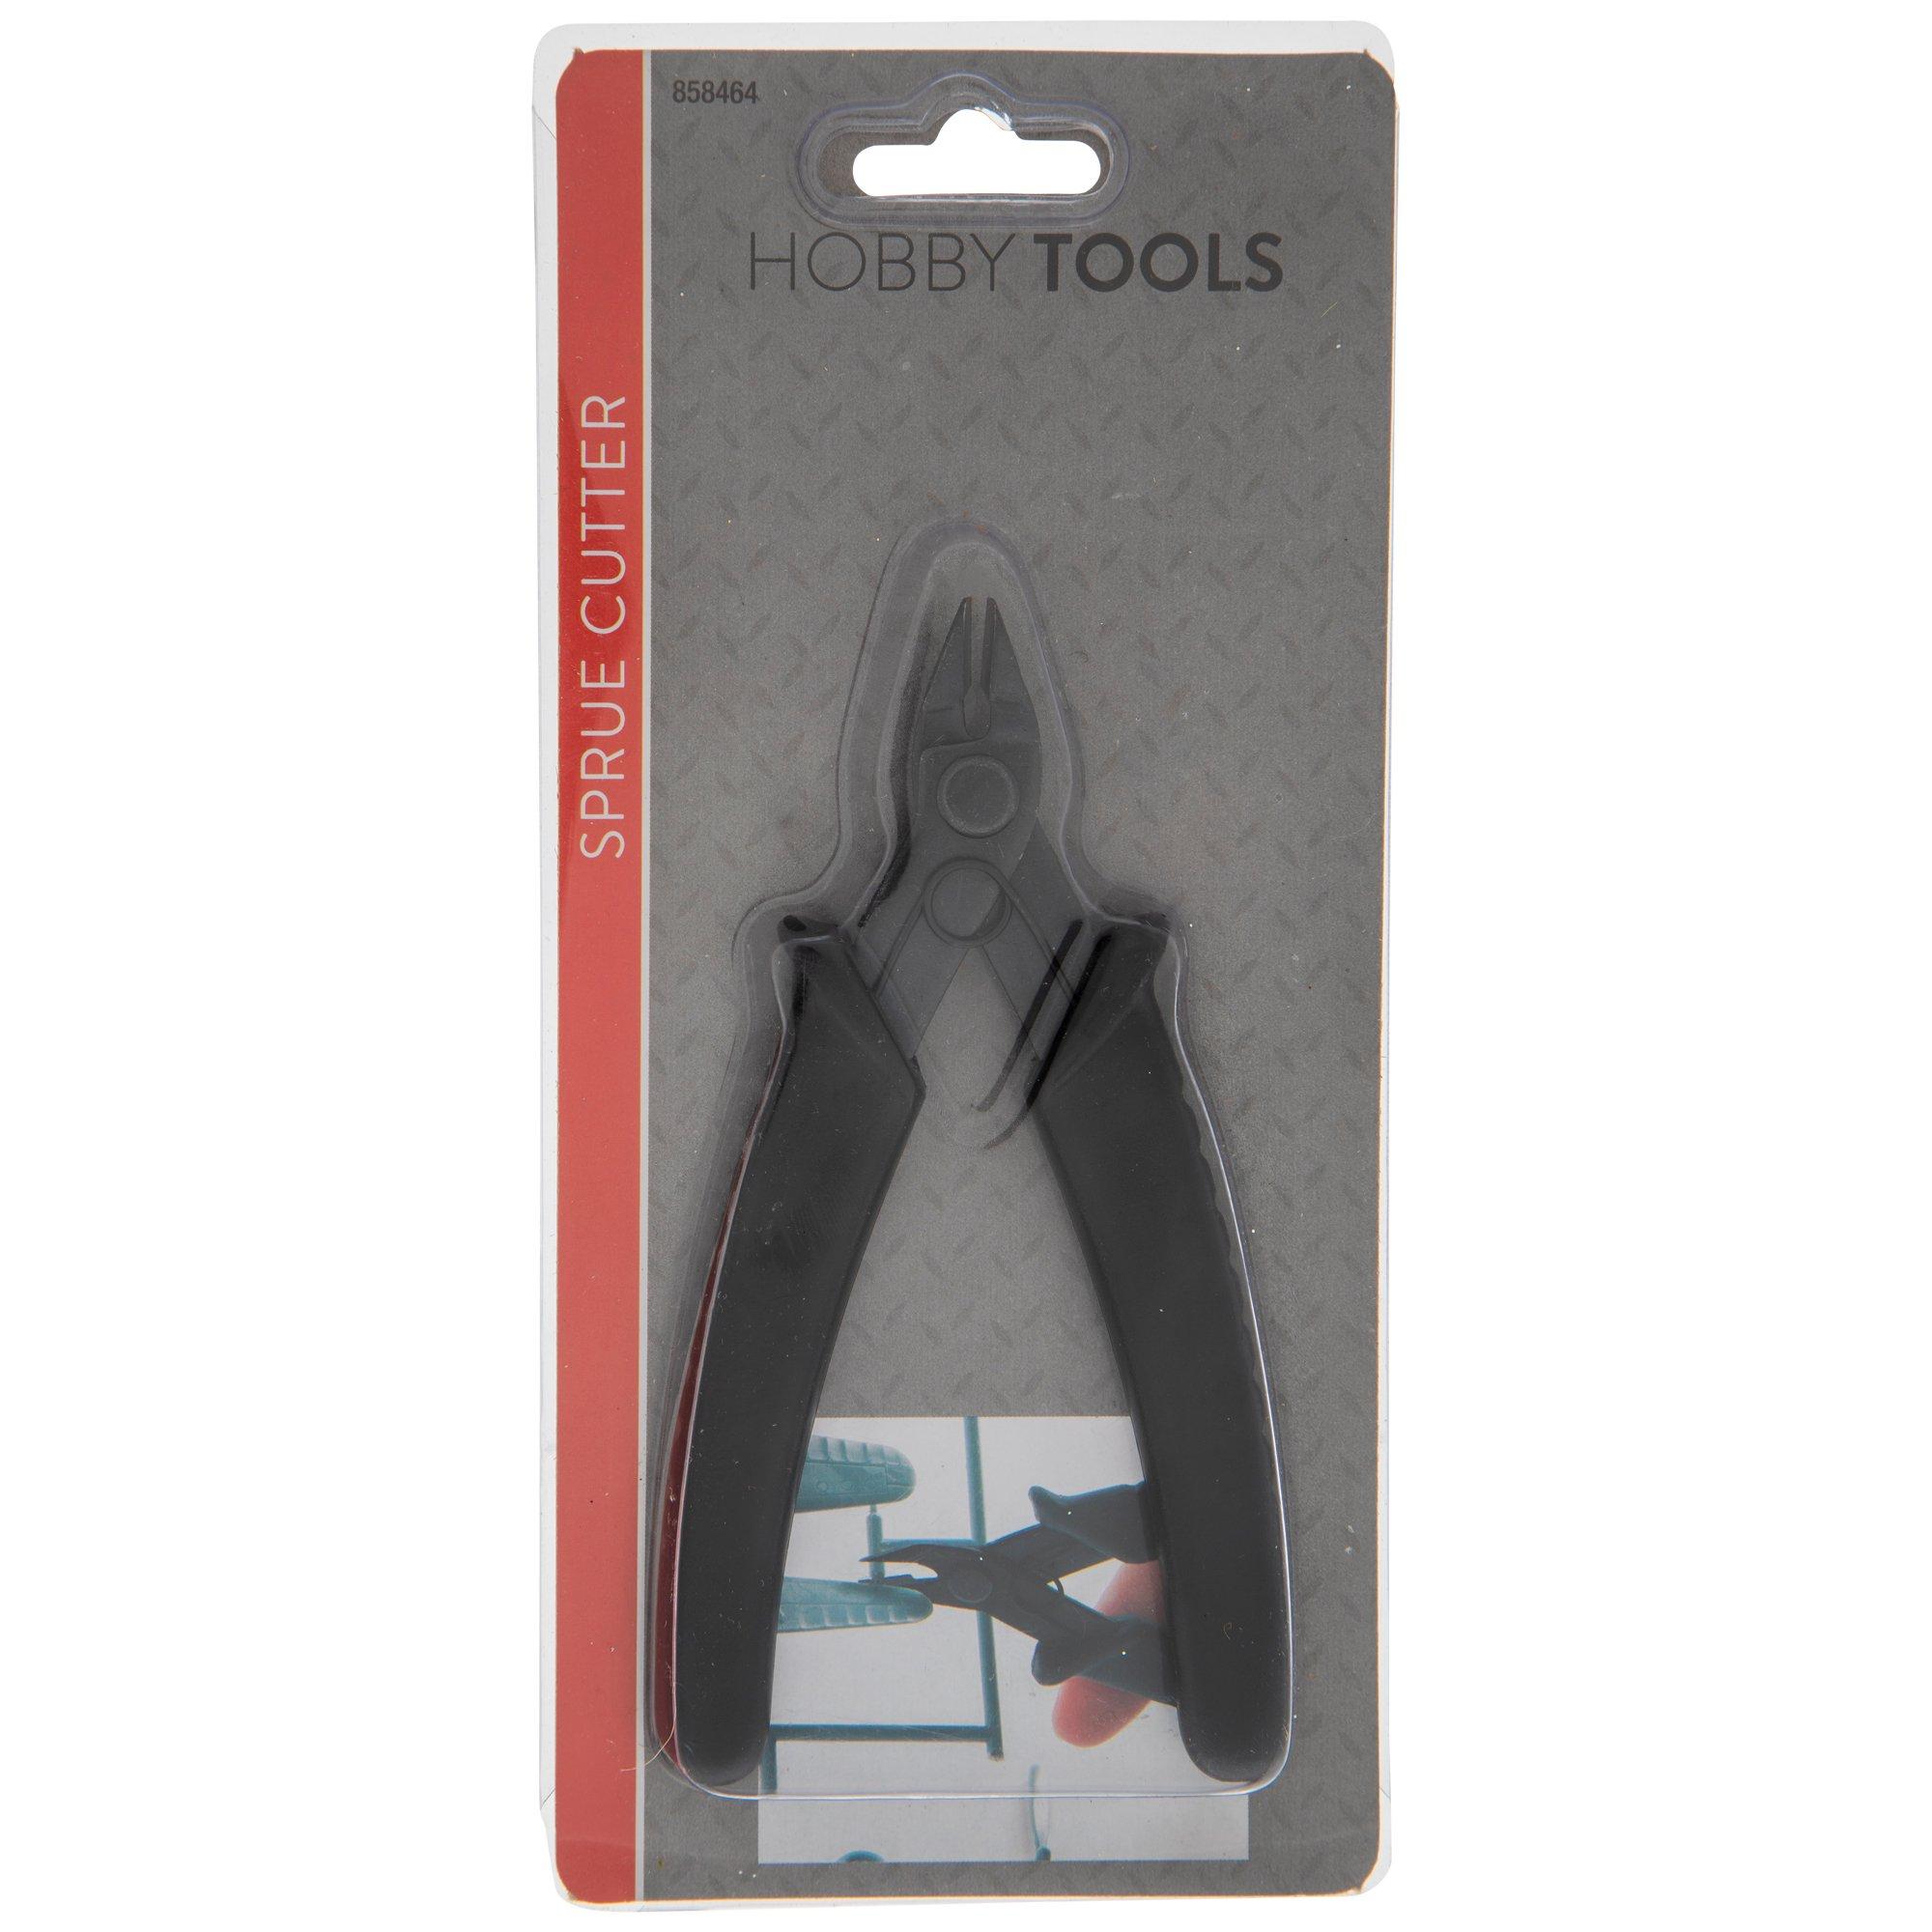 HOBBY SIZED DIAGONAL CUTTER